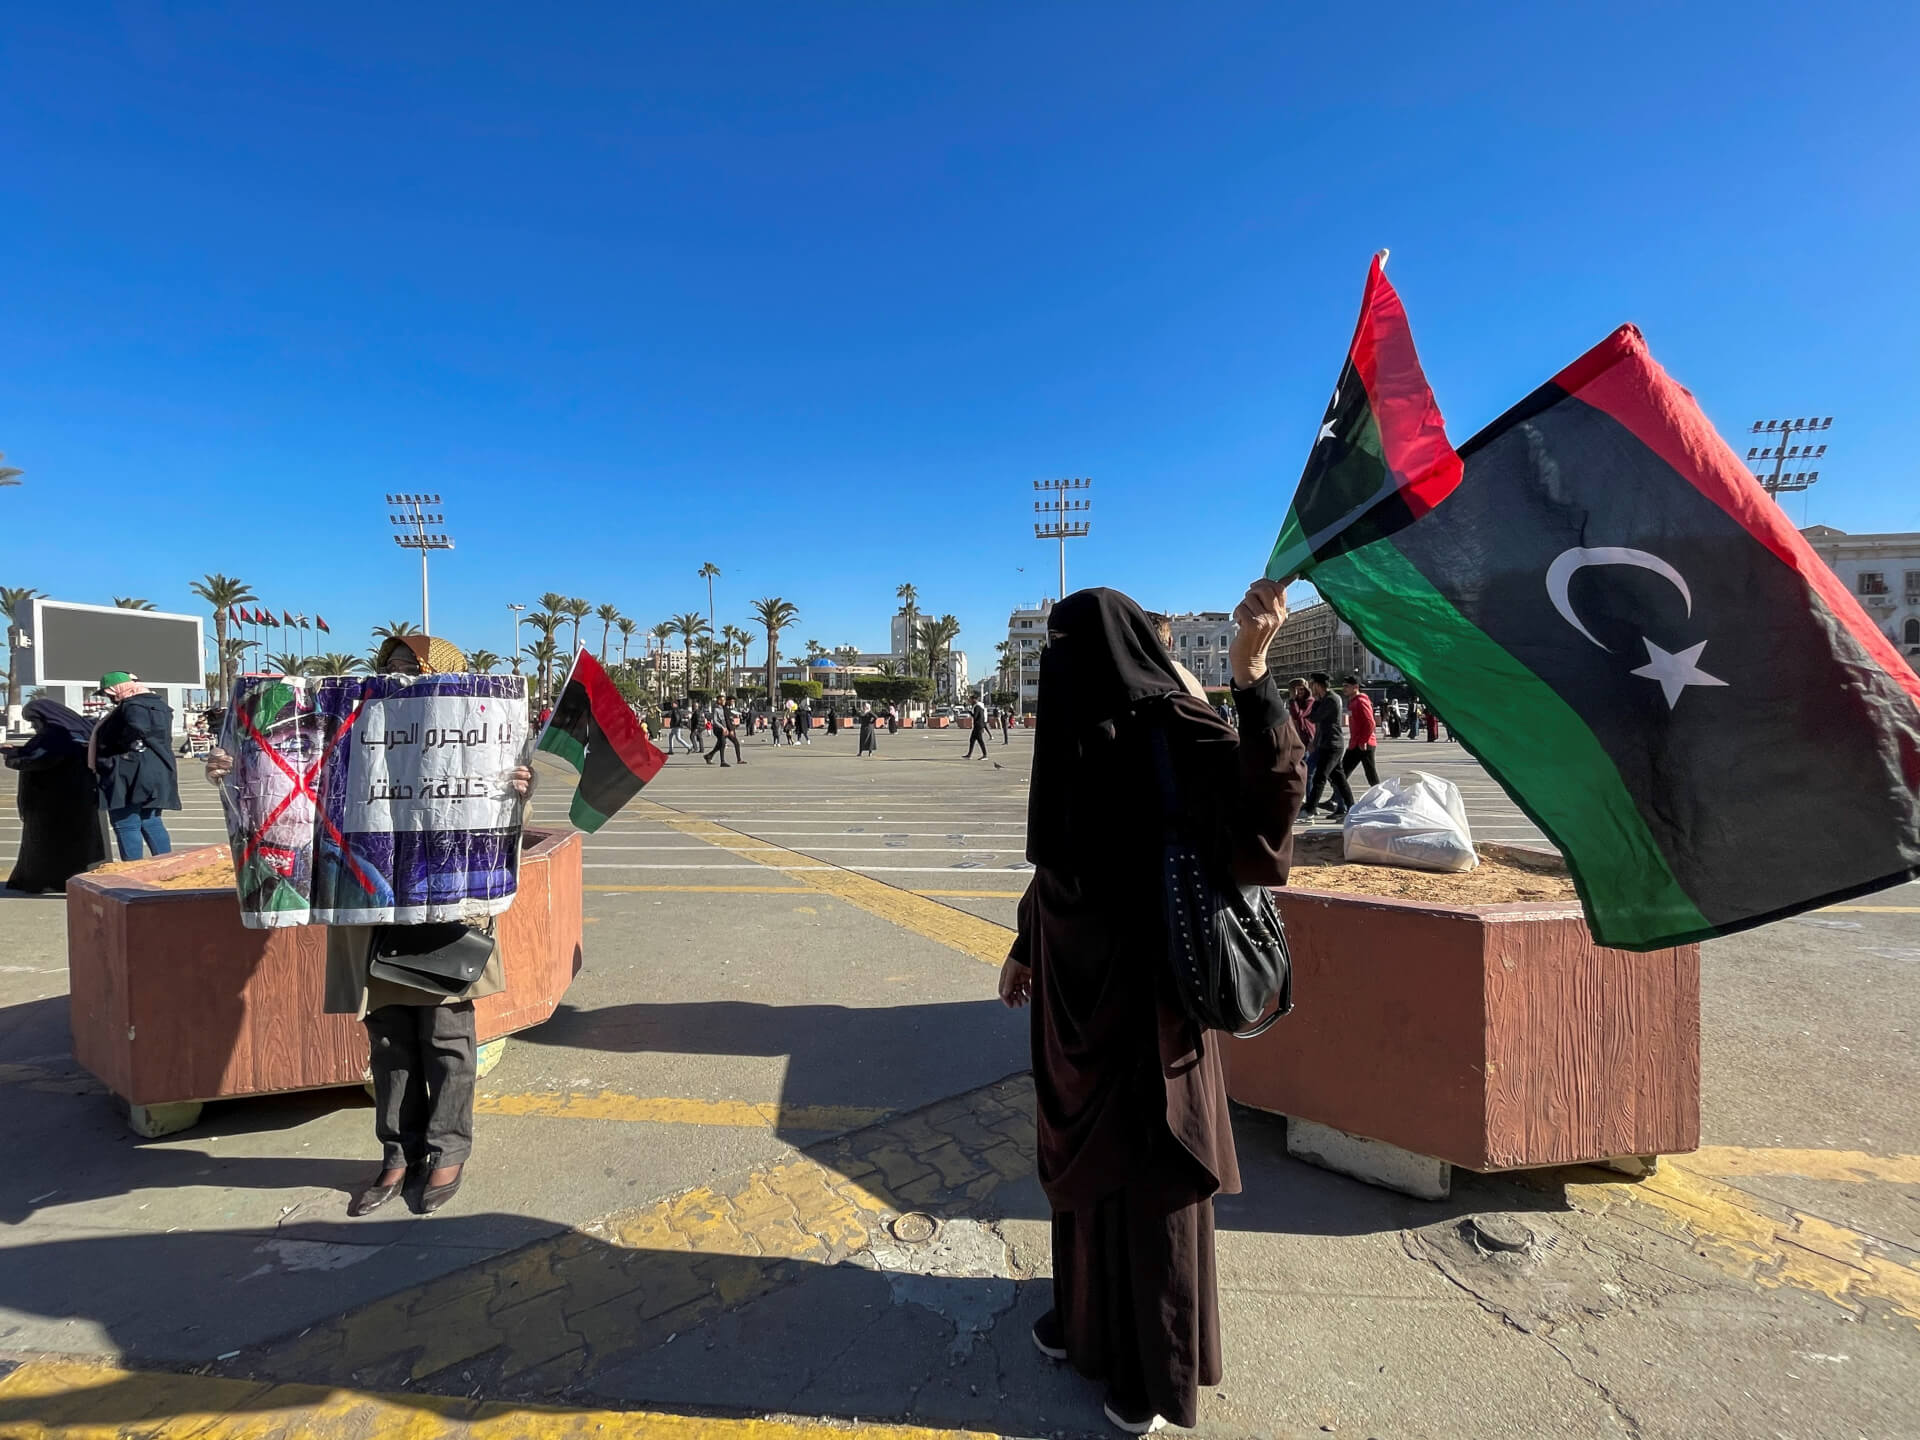 France’s Role in the Libyan Conflict Has Severely Eroded its Image as Responsible Actor